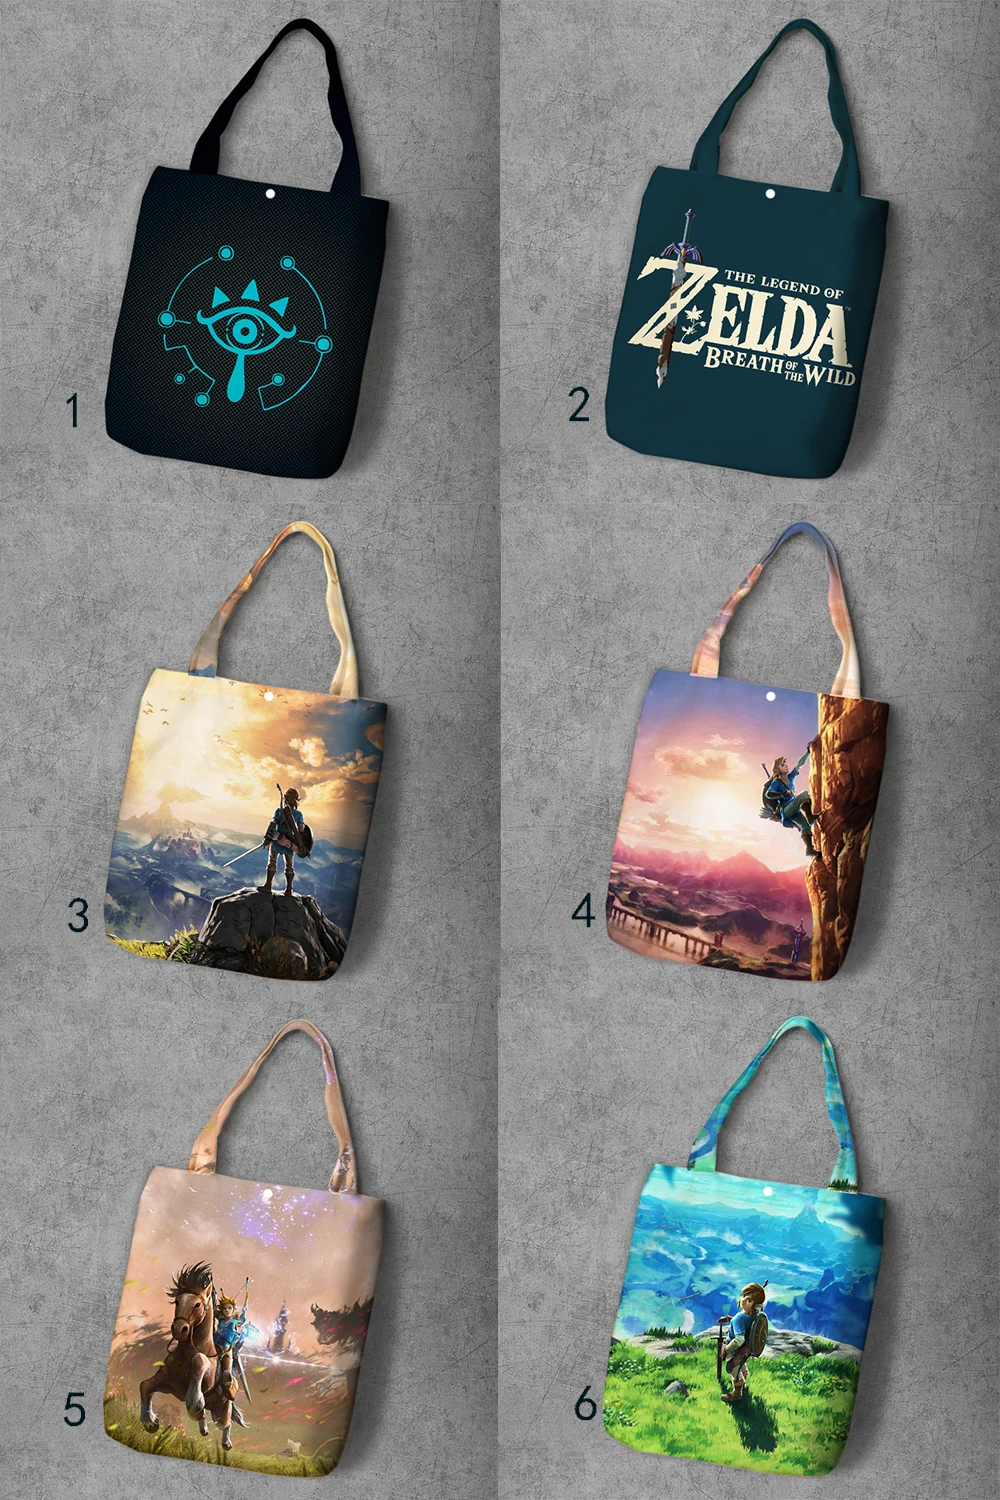 

Link Zelda Cartoon Printed Recycle Canvas Shopping Bag Large Capacity Customize Tote Fashion Lady Casual Shoulder Bags